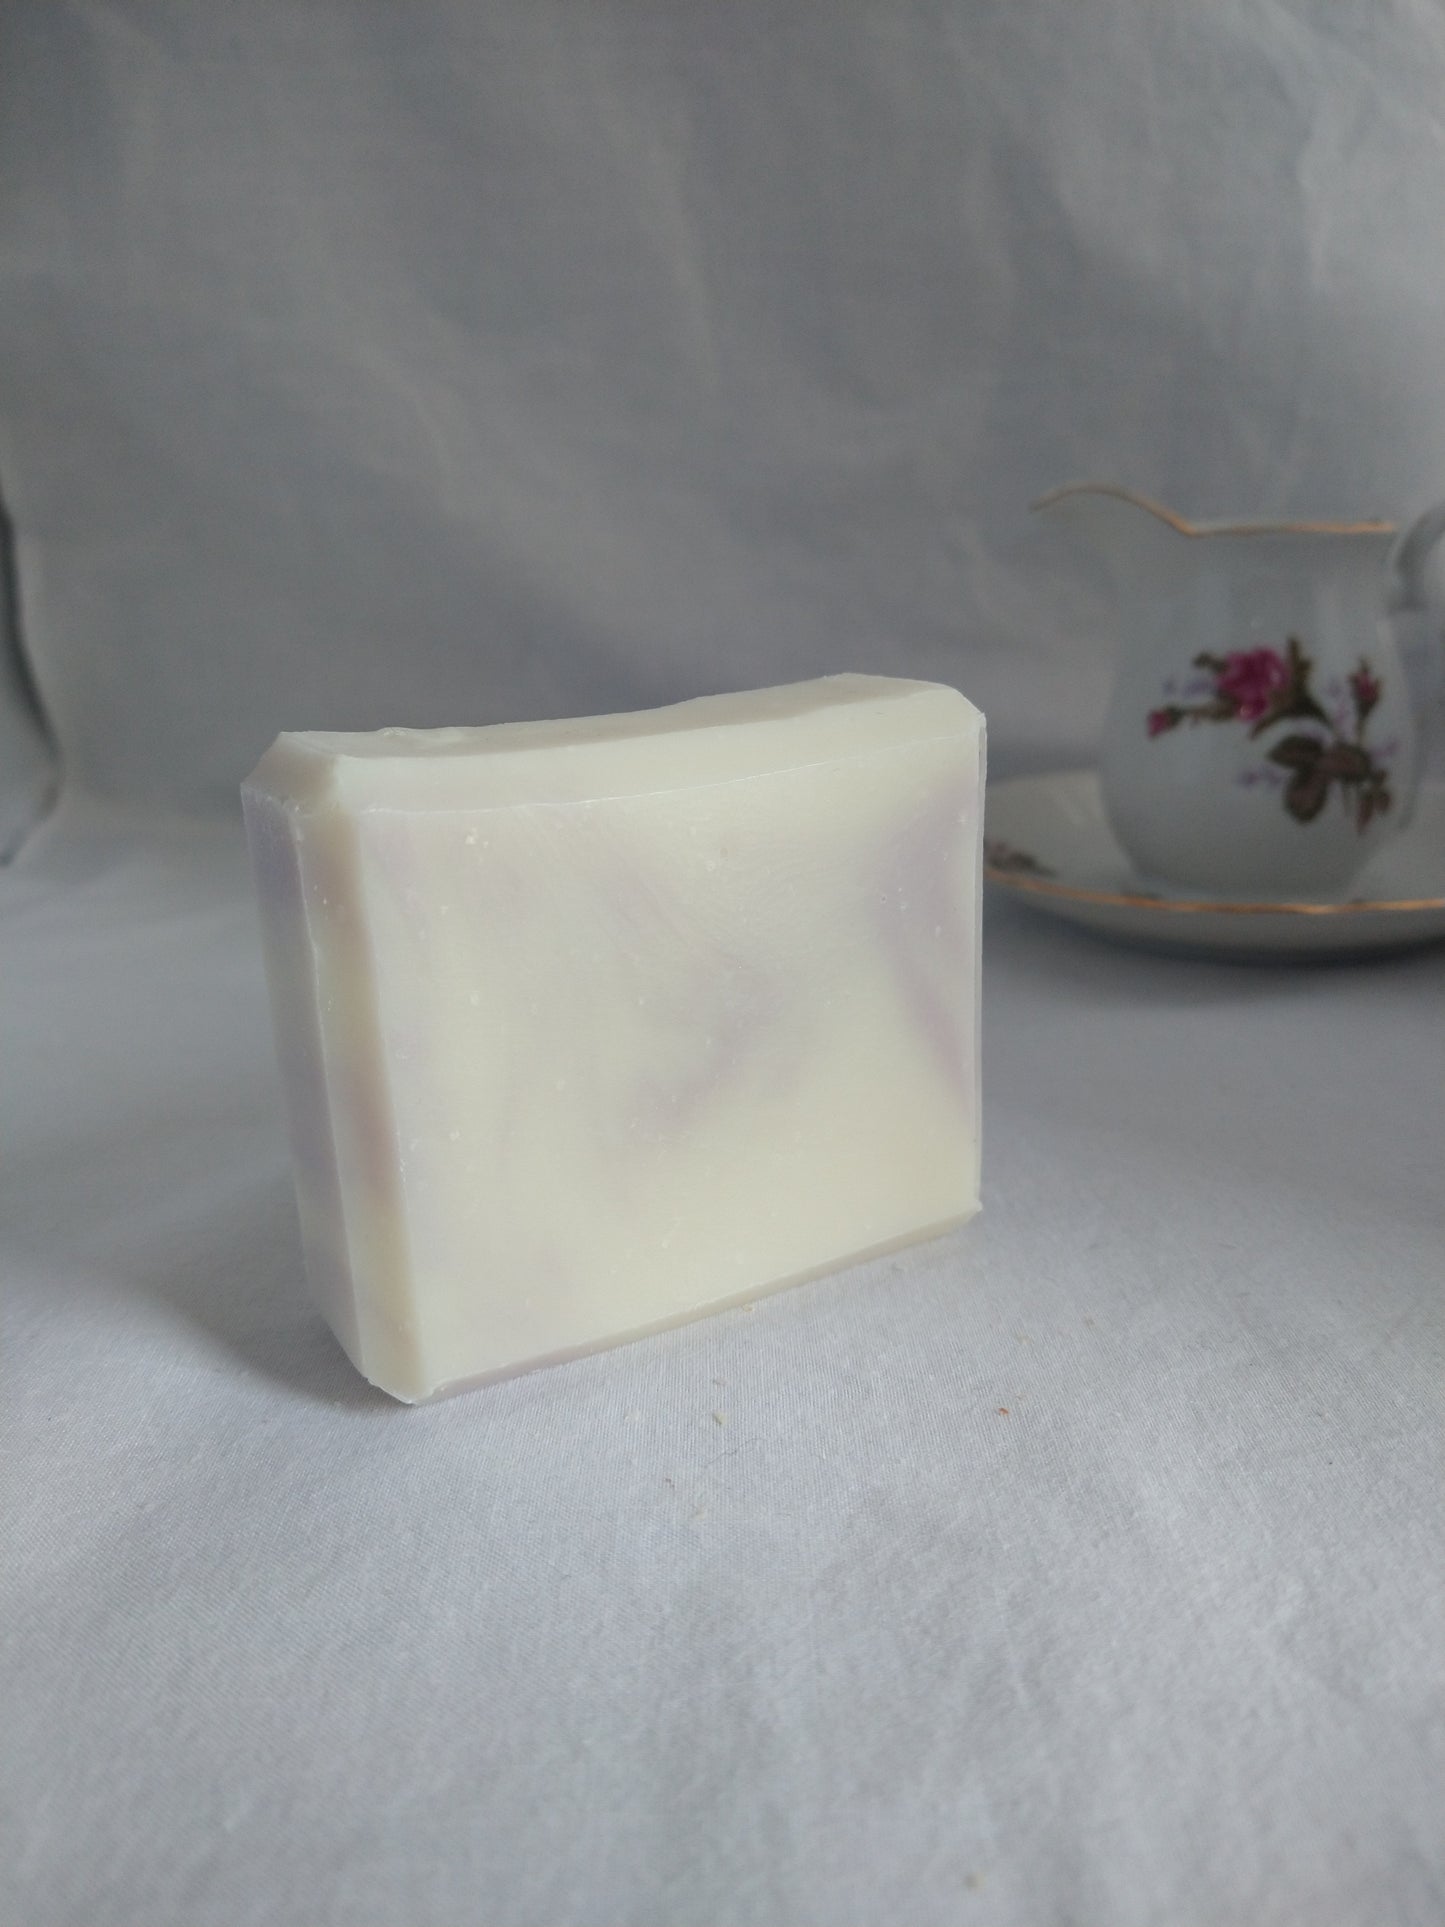 Local tallow soap